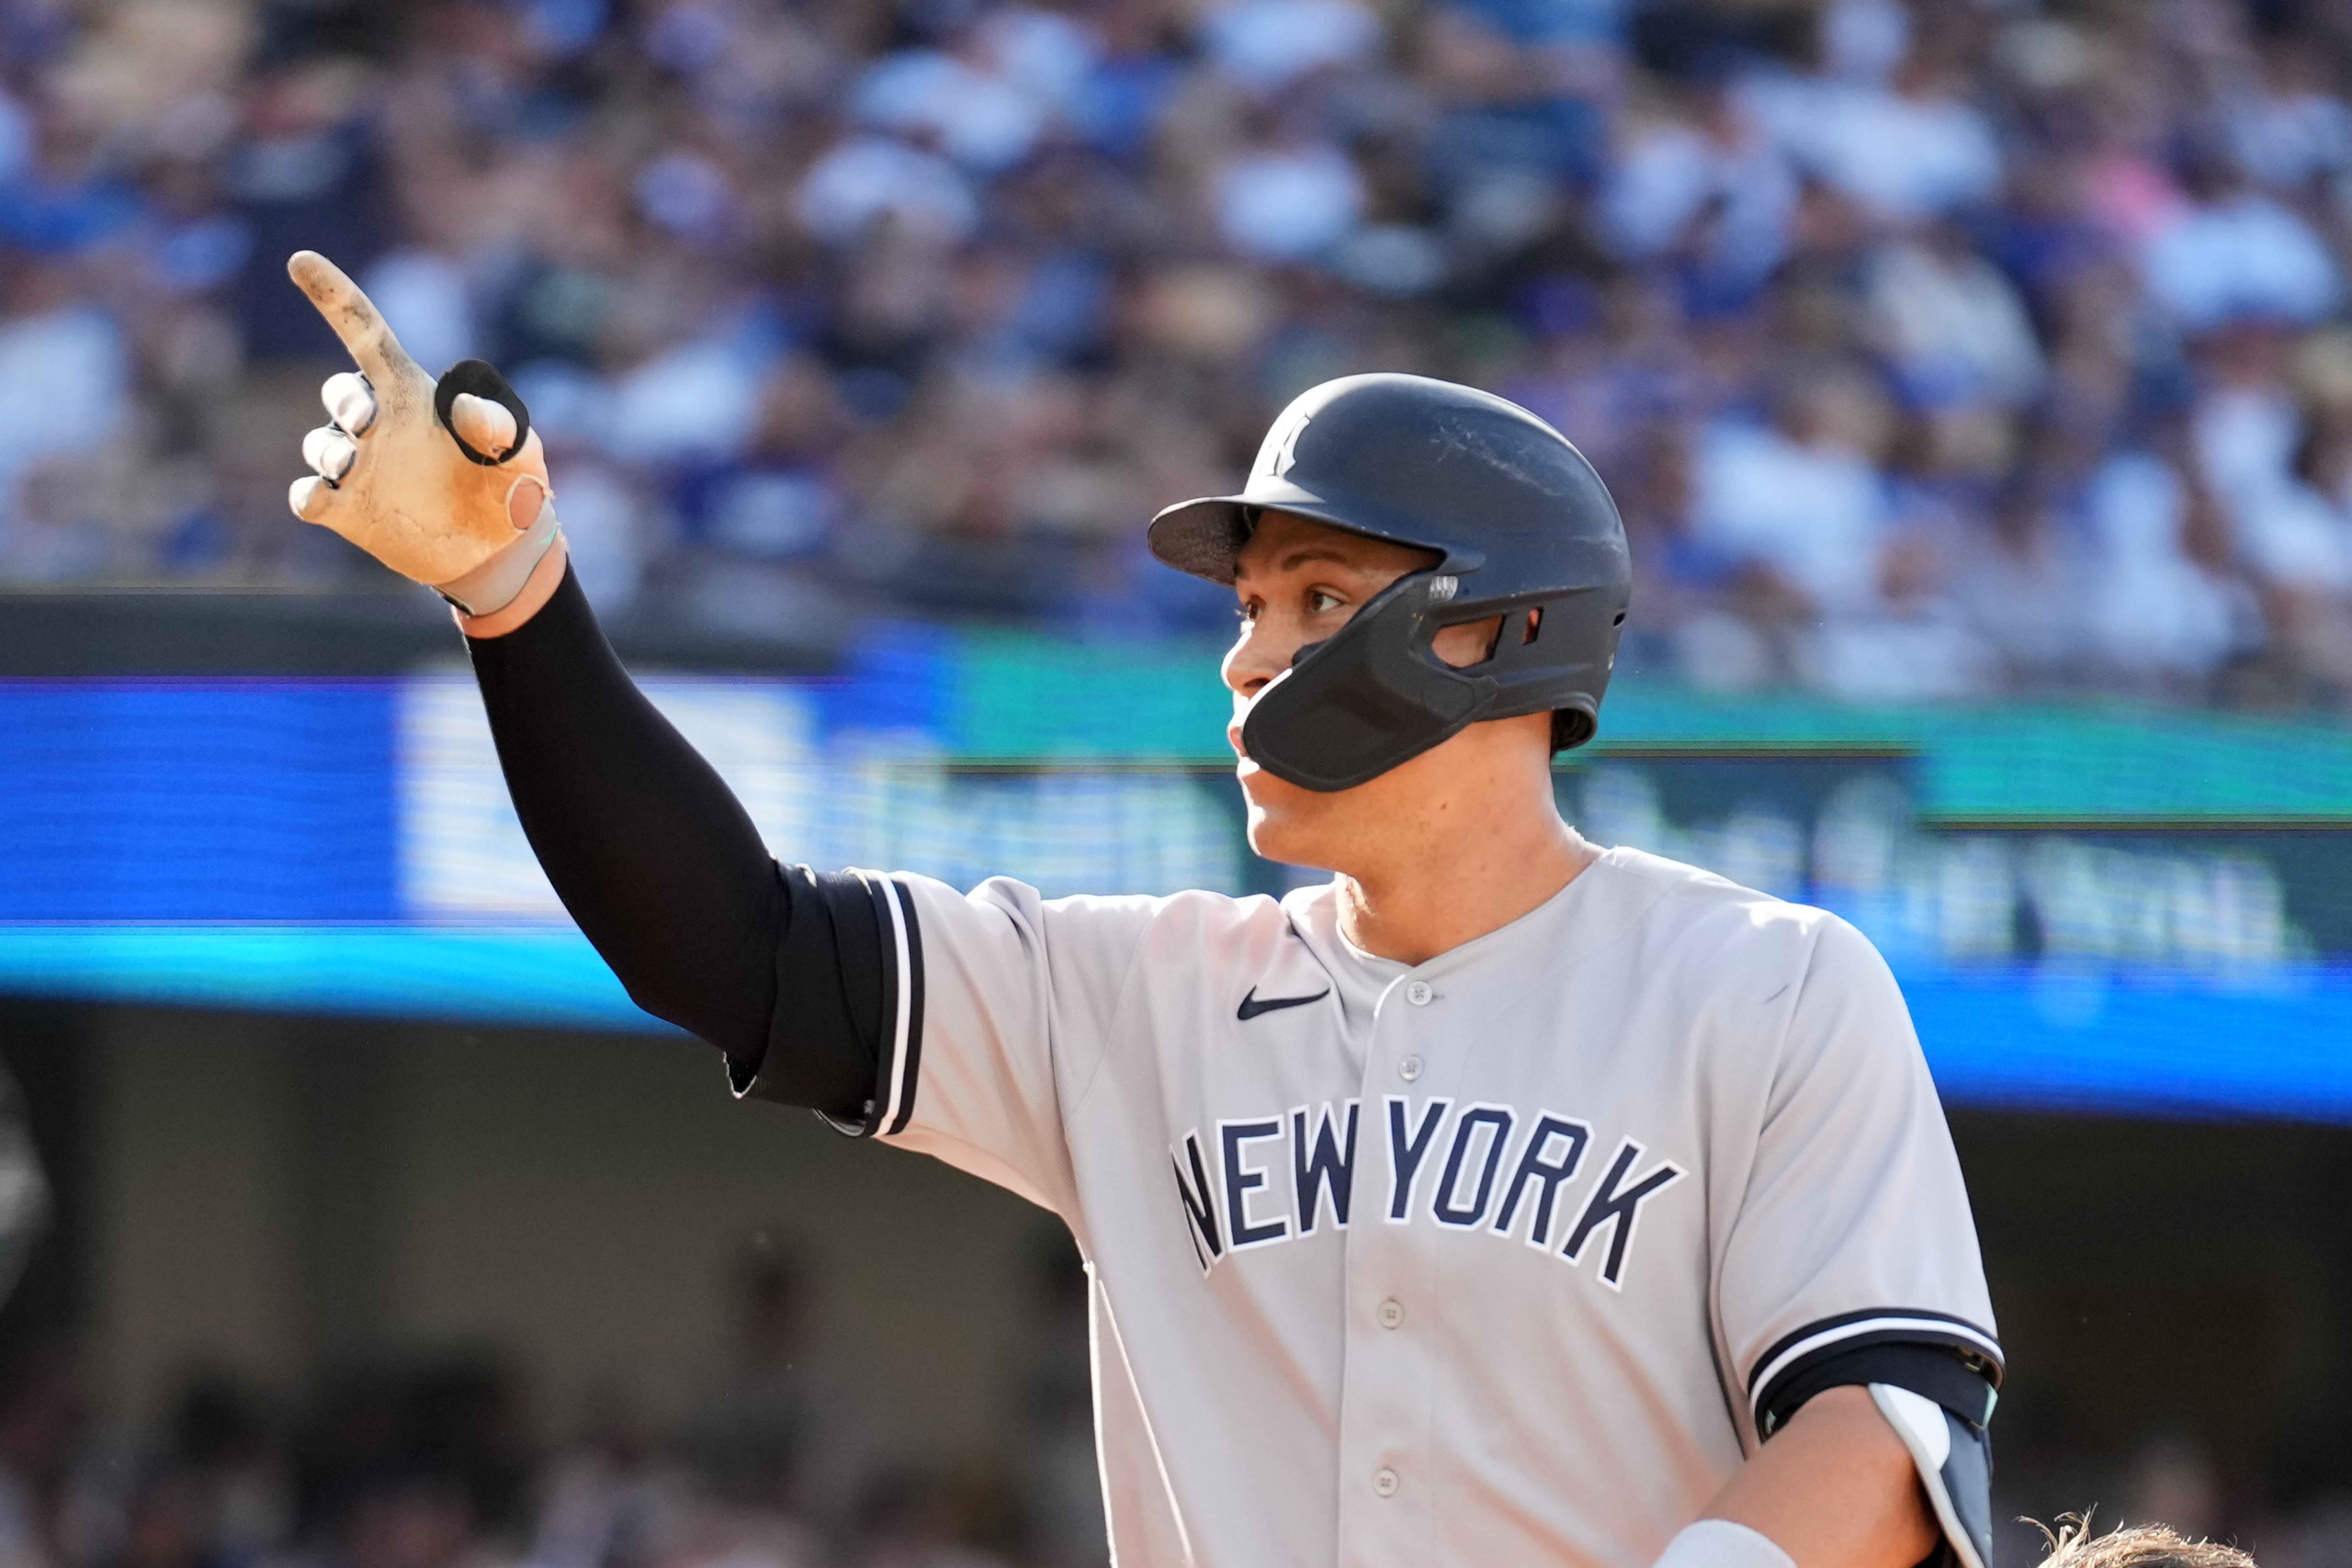 New York Yankees game today TV schedule, channel, and more